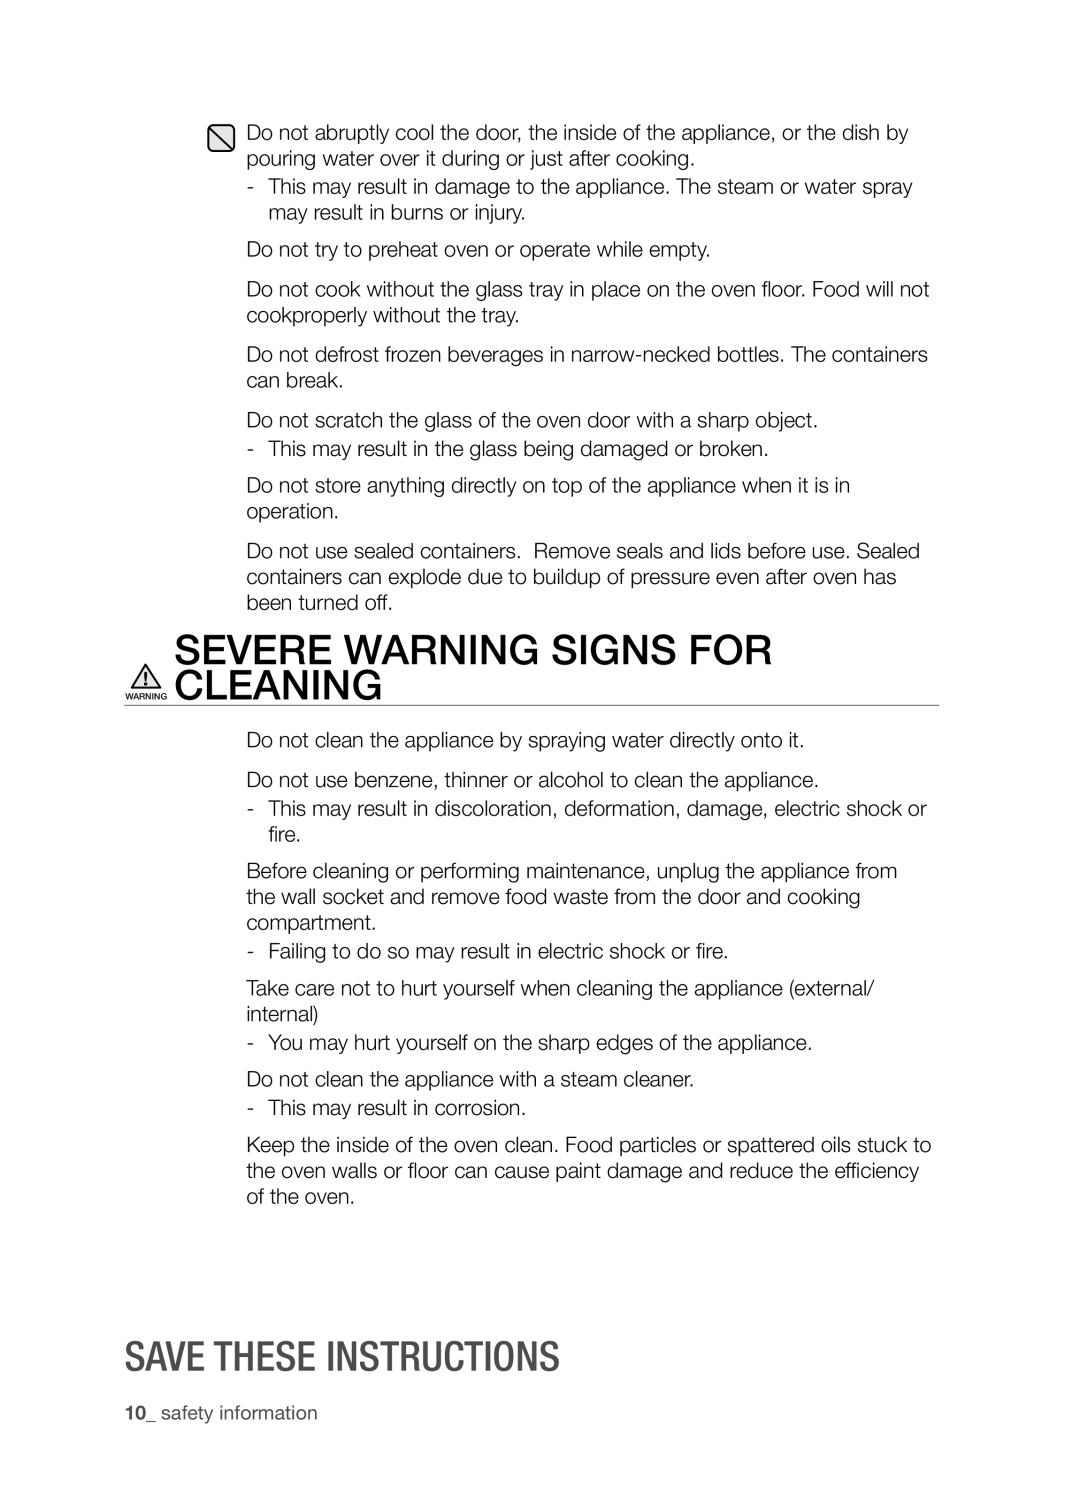 Samsung SMH9207ST user manual Severe Warning Signs For Warning Cleaning, Save these instructions, safety information 